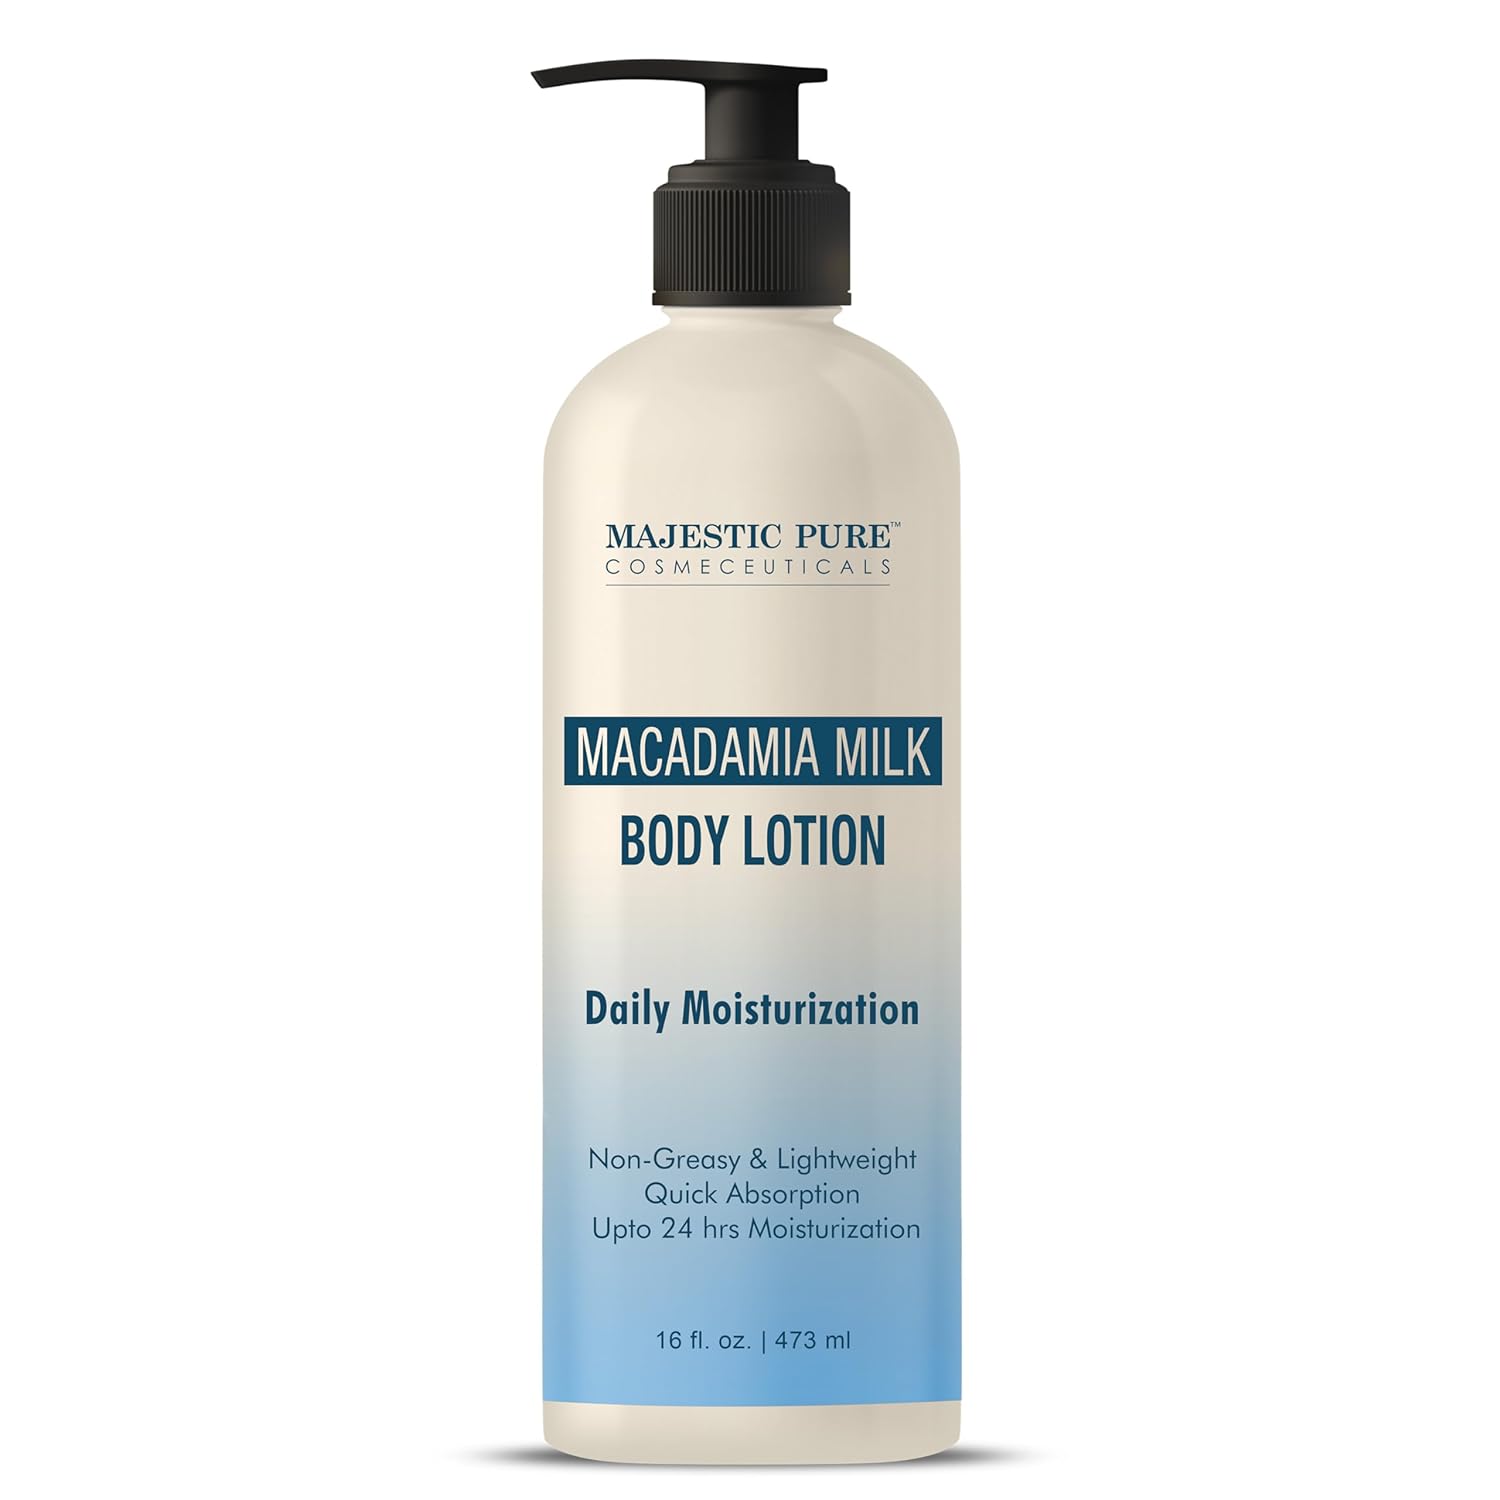 MAJESTIC PURE Macadamia Milk Daily Moisturizing Body Lotion with Aloe Leaf Extracts | Nourishing & Moisturizing | Quick Absorbing, Lightweight & Non Greasy | For All Skin Types | 16fl oz